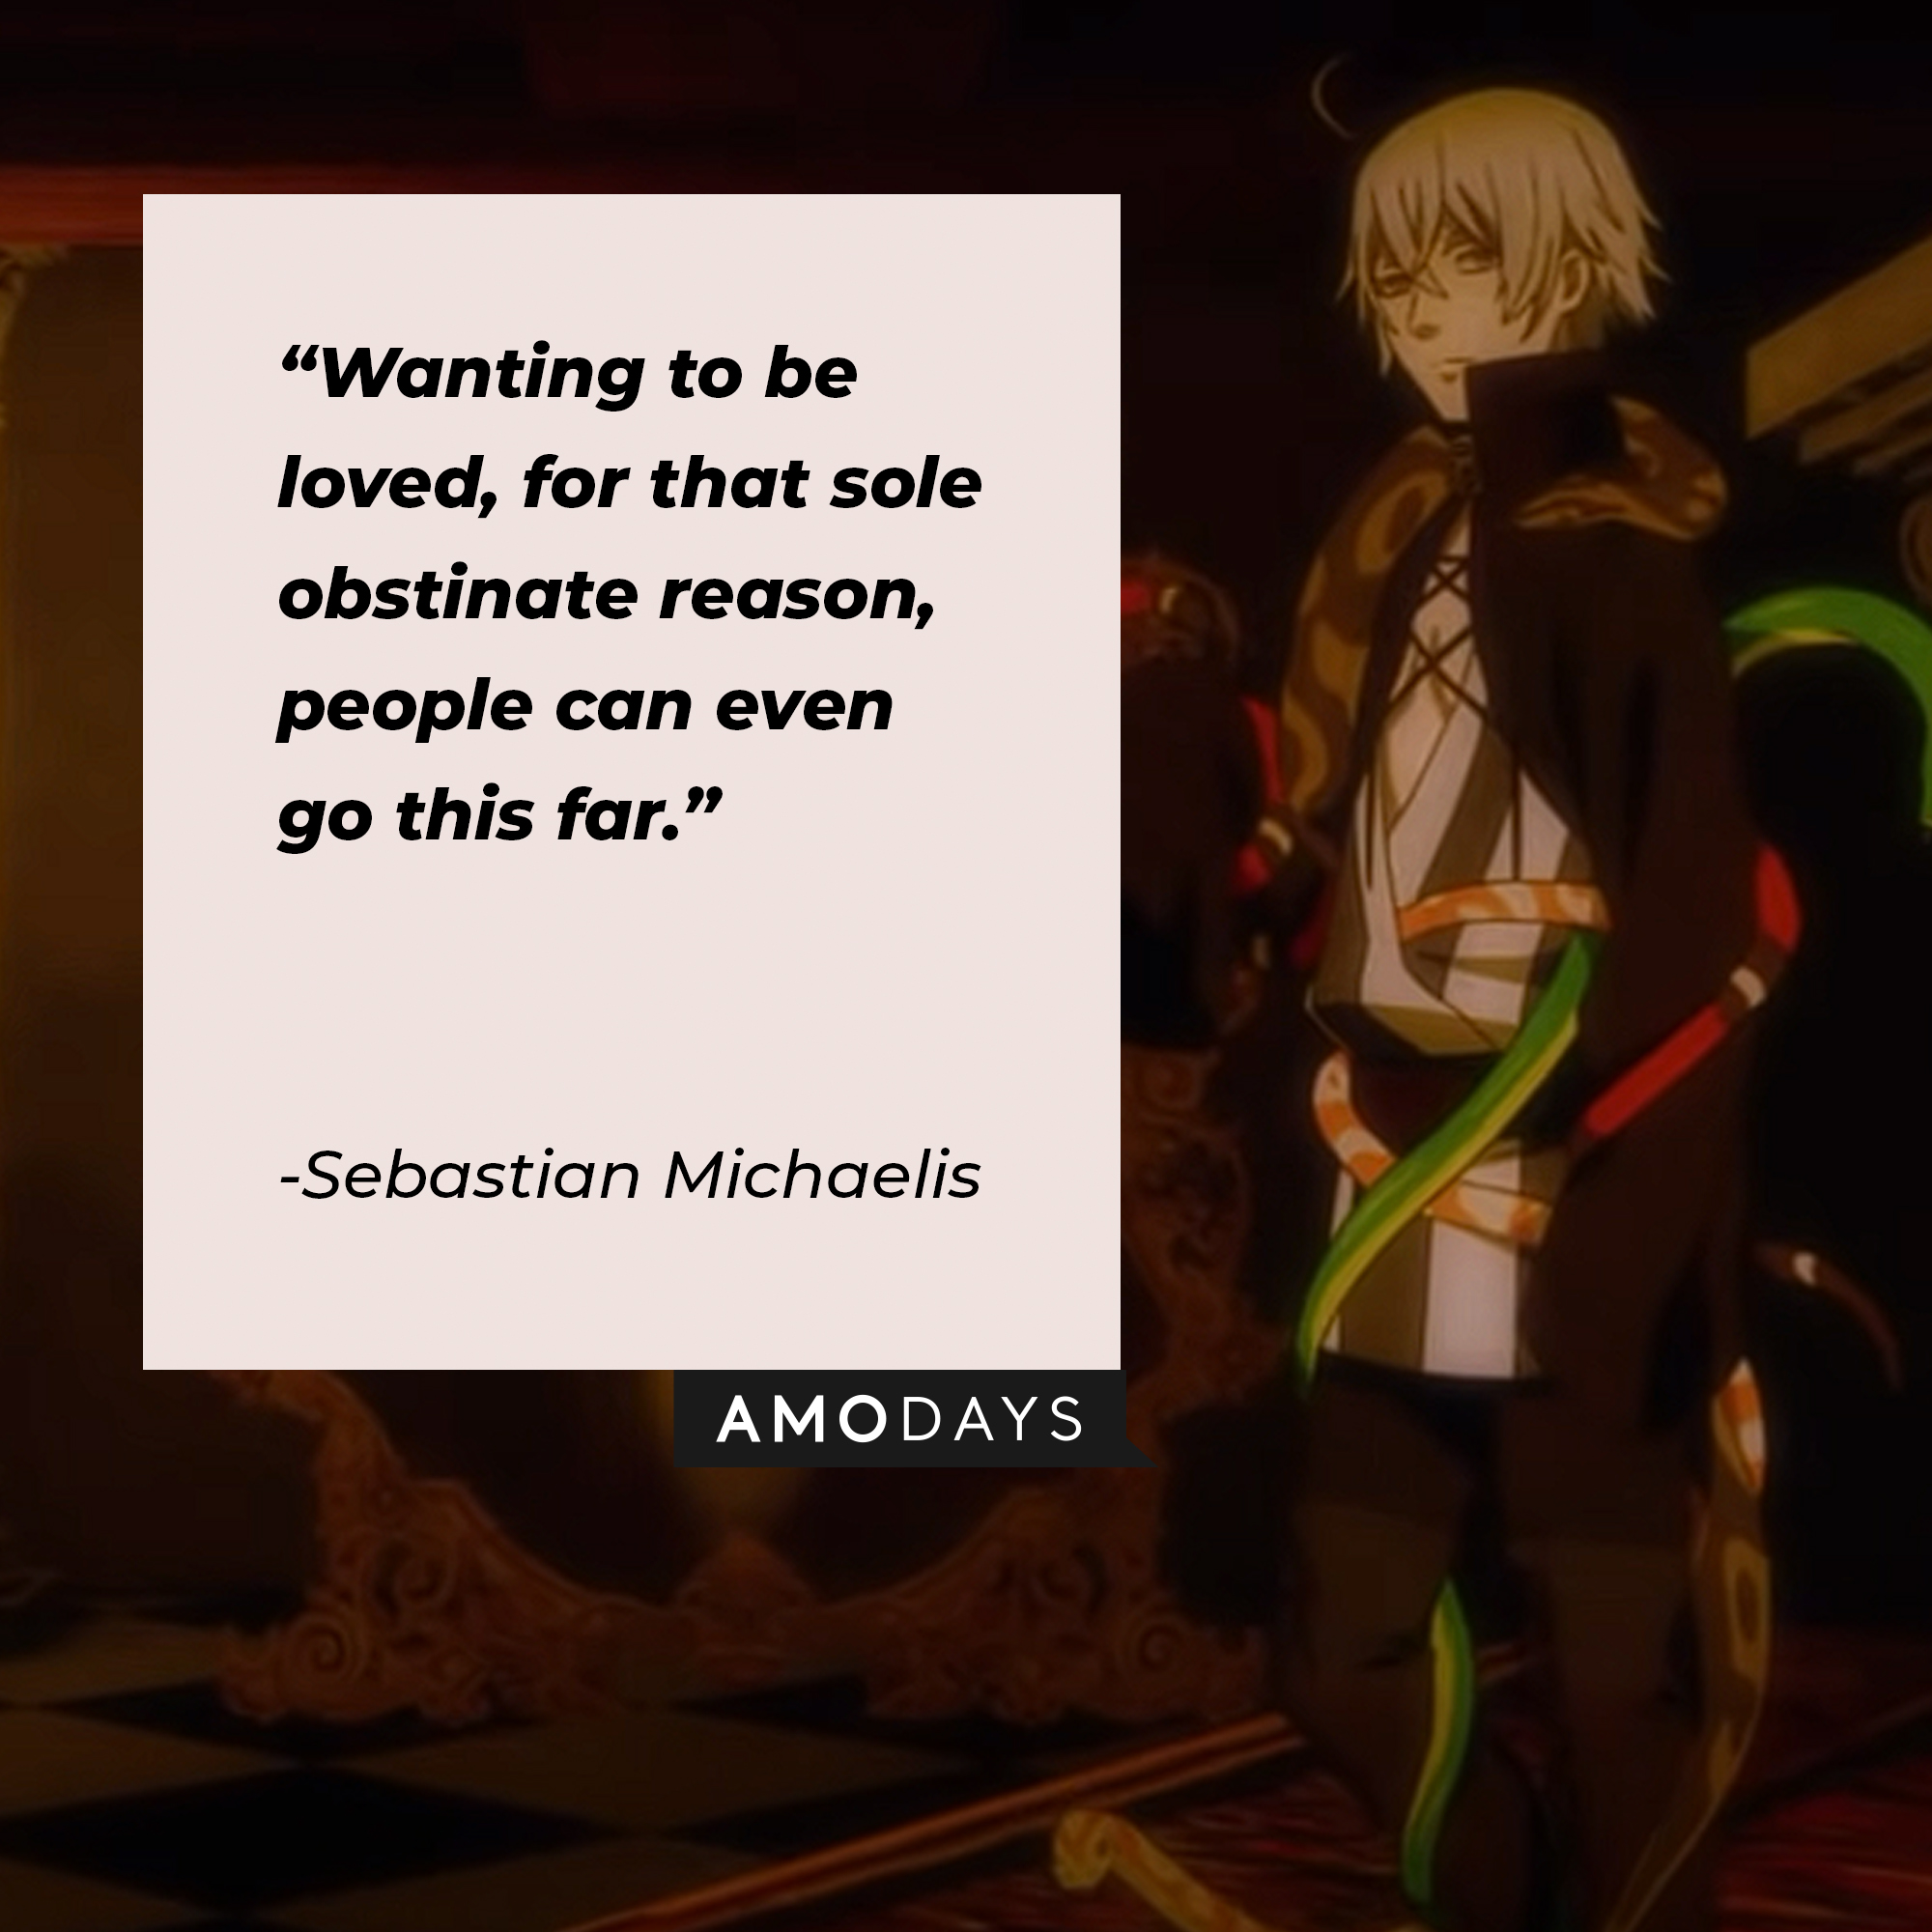 An image from "Black Butler" with Sebastian Michaelis' quote: "Wanting to be loved, for that sole obstinate reason, people can even go this far." | Source: youtube.com/Crunchyroll Dubs